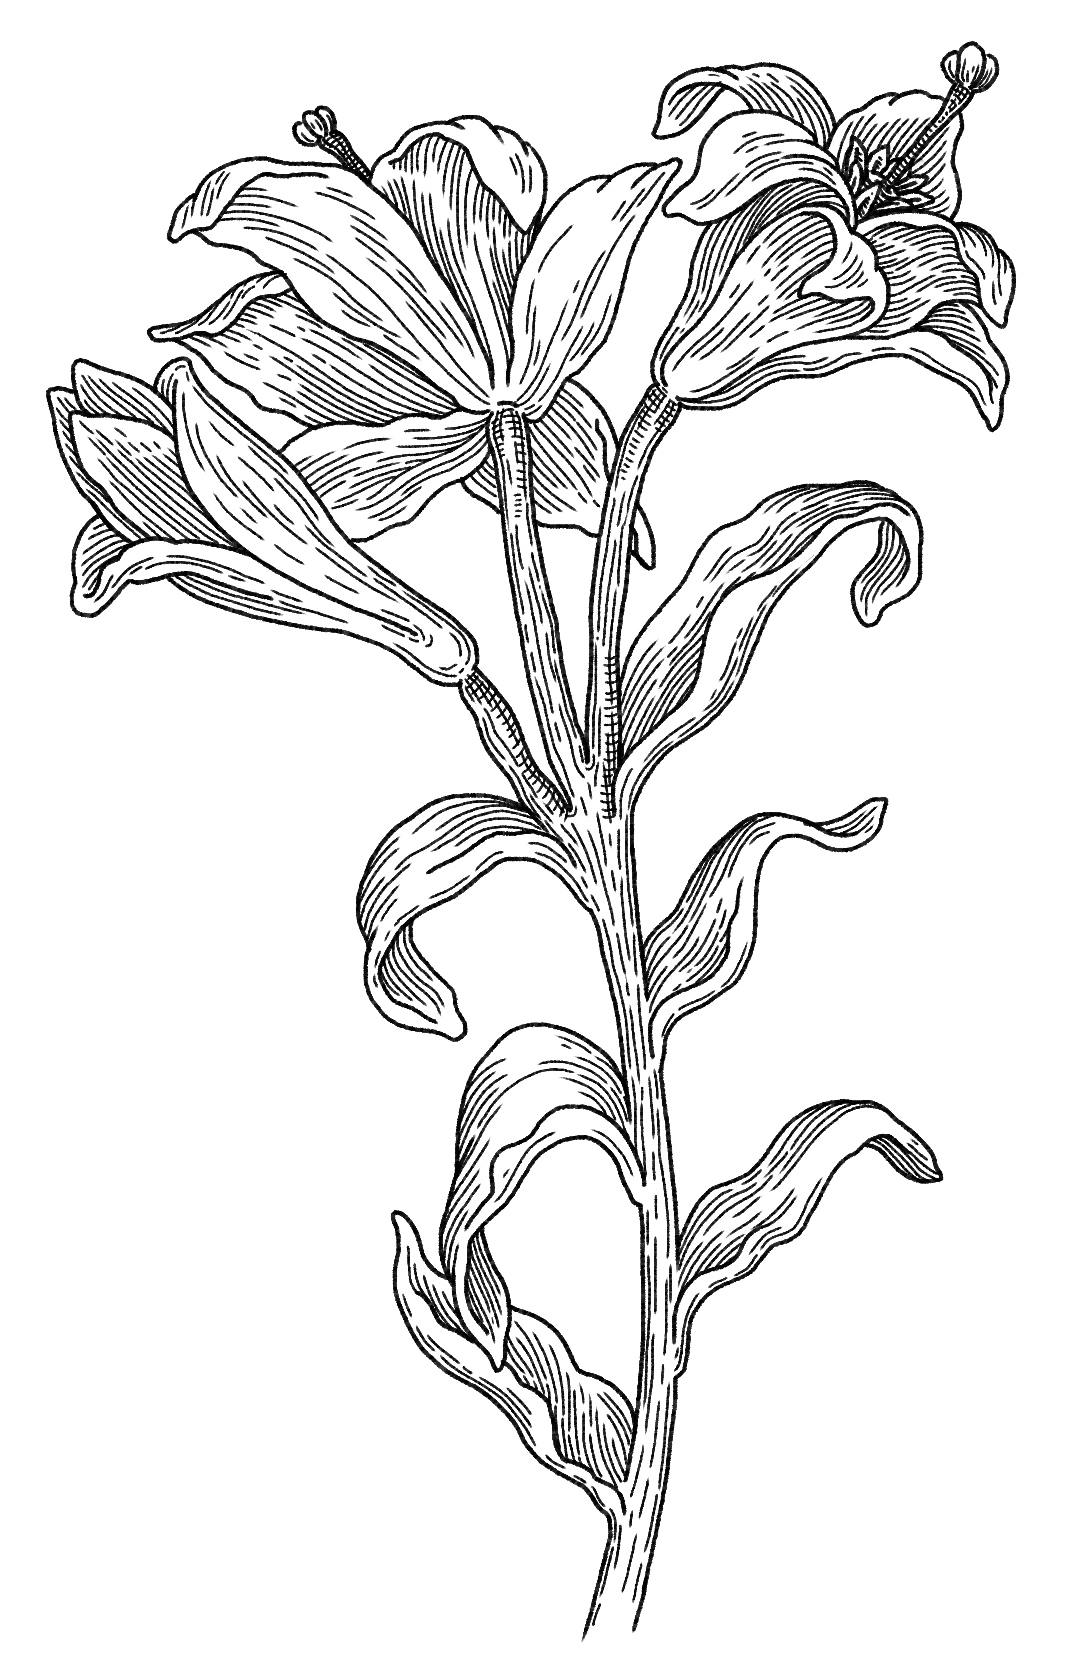 Black and white illustration of a lily for the Wall paper illustrated by Swindler & Swindler for the Spanish Gallery